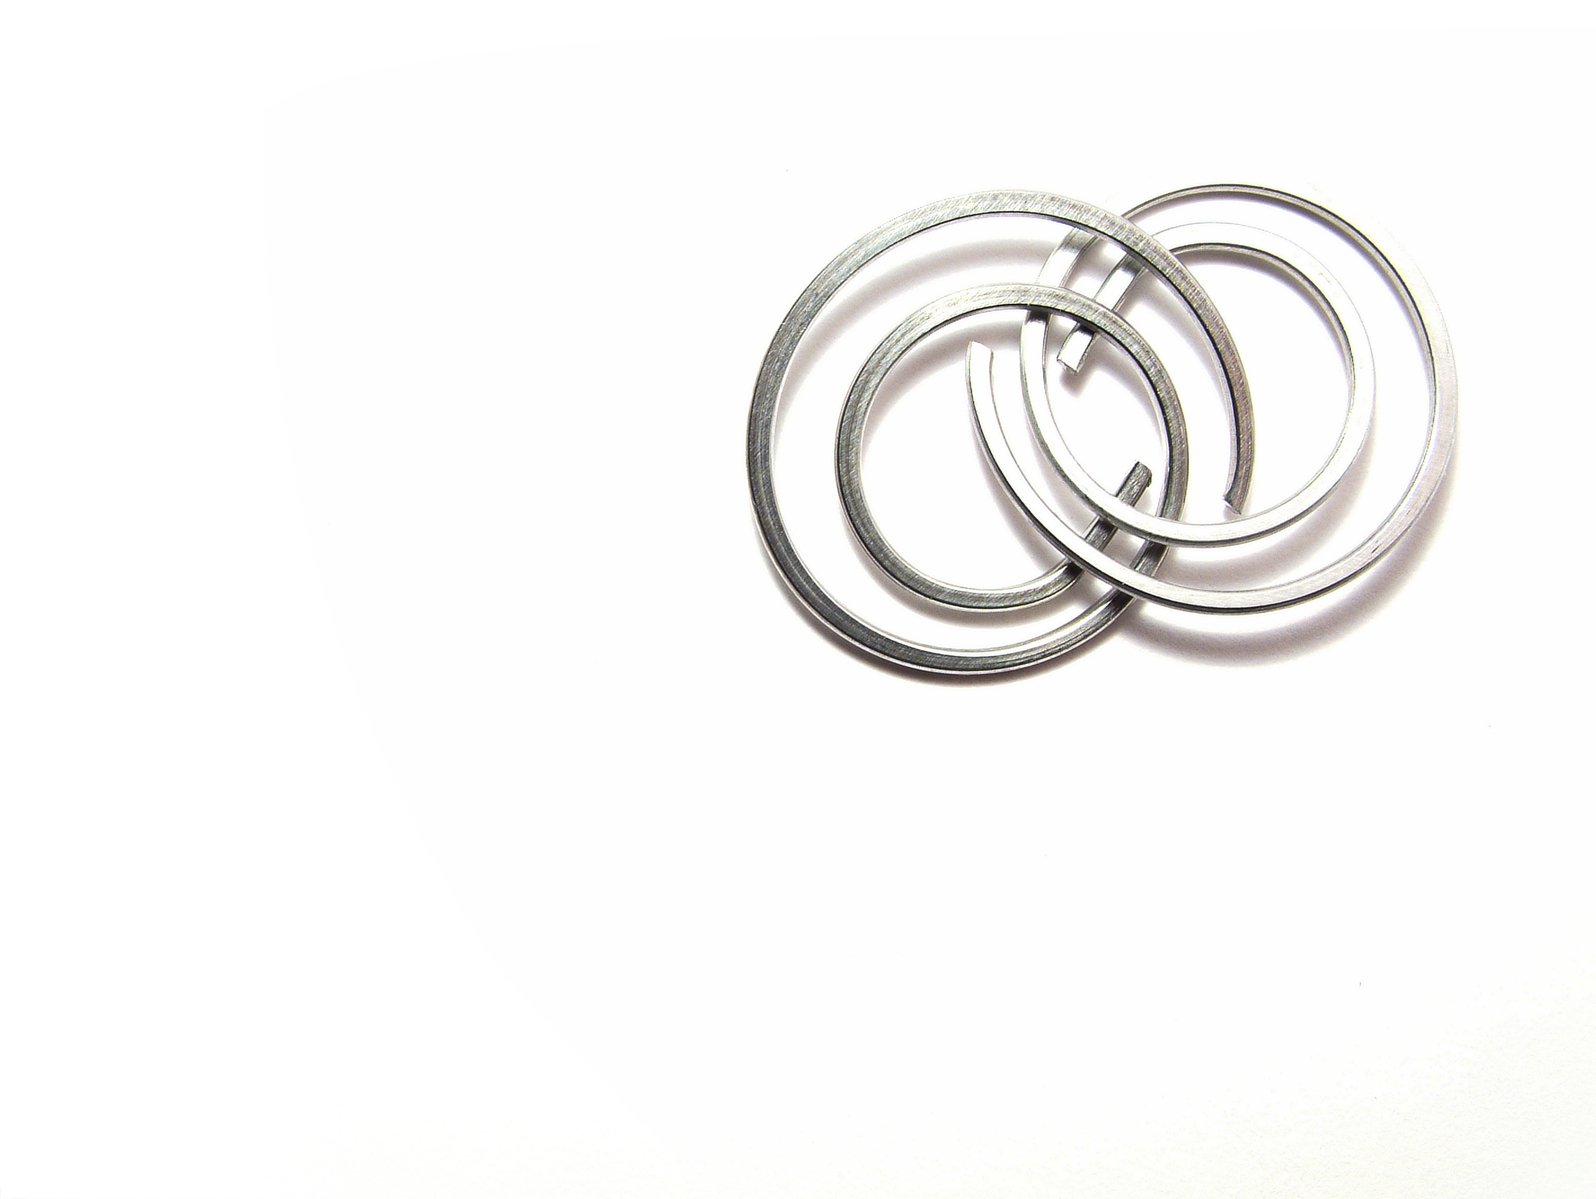 three circular pieces of metal sitting on a white surface